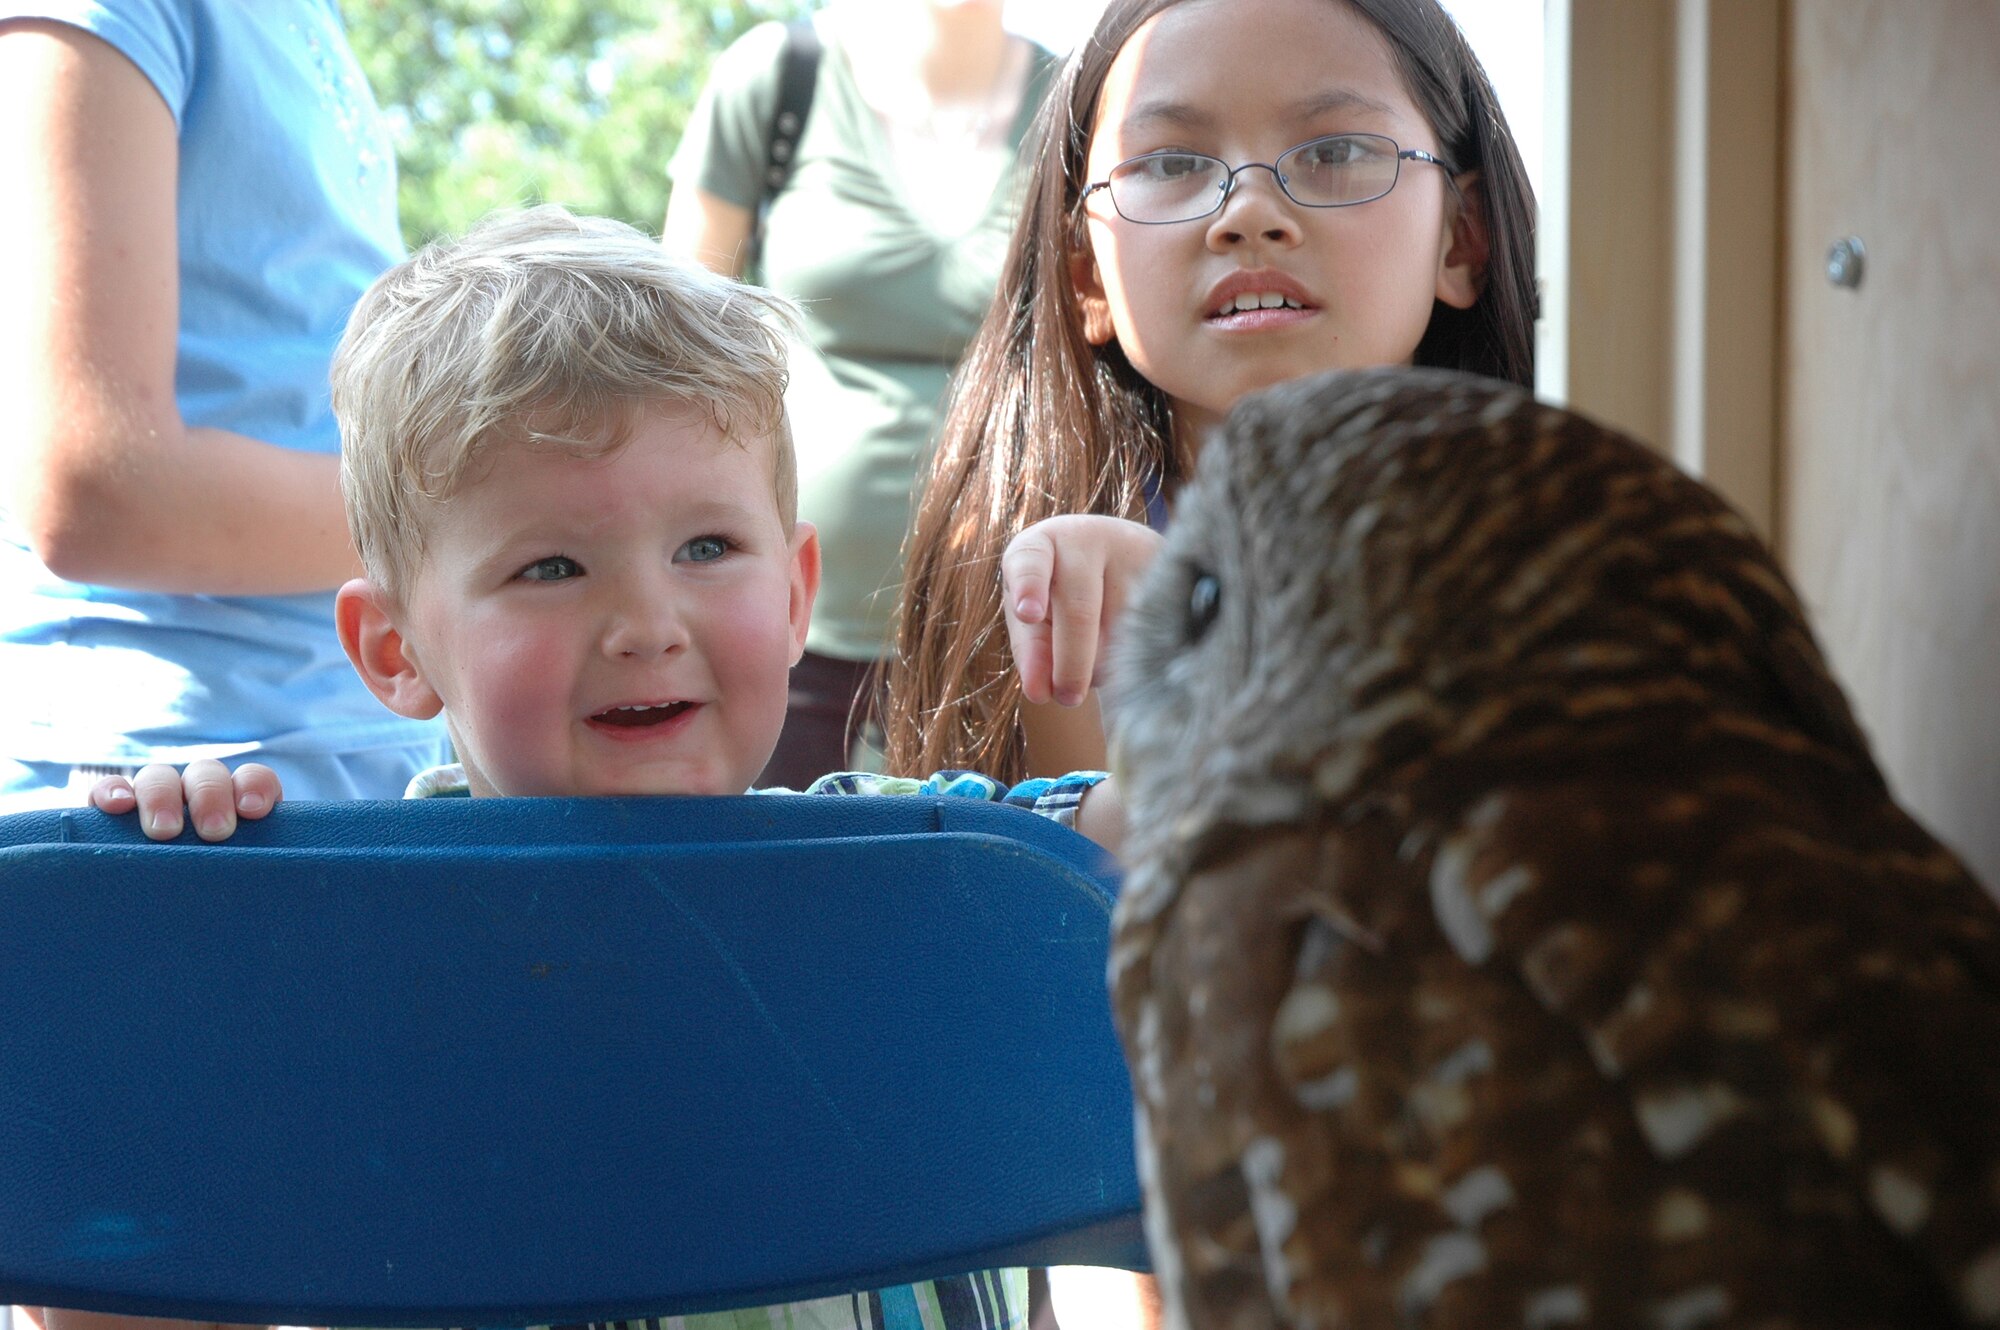 EGLIN AIR FORCE BASE, Fla. -- Michael Garden, 2, and Alesha Fairchild, 8, admire April, a barn owl and educational animal brought to Eglin's annual Pet Bazaar by the Emerald Coast Wildlife Refuge May 5. The event is sponsored for pet owners and offered a pet show, vendors, a military working dog demonstration and visits by McGruff the Crime Dog and Sparky the Fire Dog. (U.S. Air Force photo by Staff Sgt. Mike Meares)